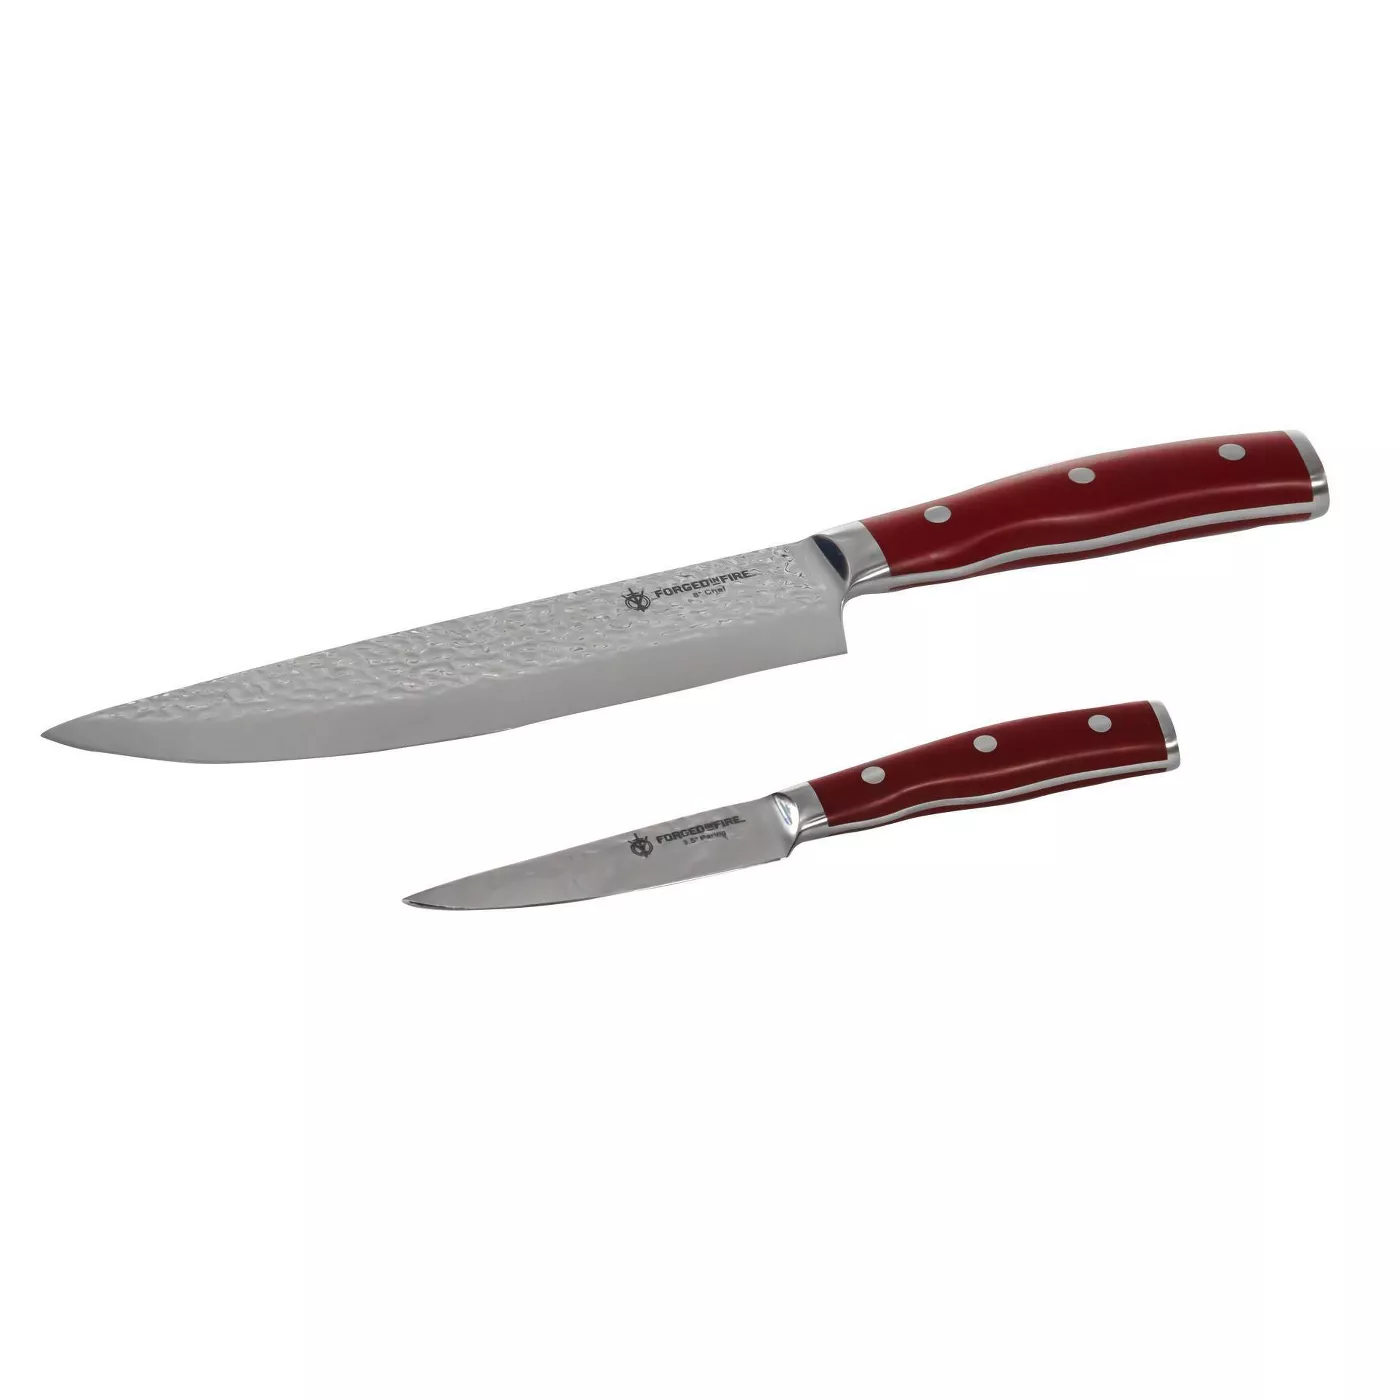 As Seen On TV 2pc Forged in Fire Knife Set - image 1 of 11